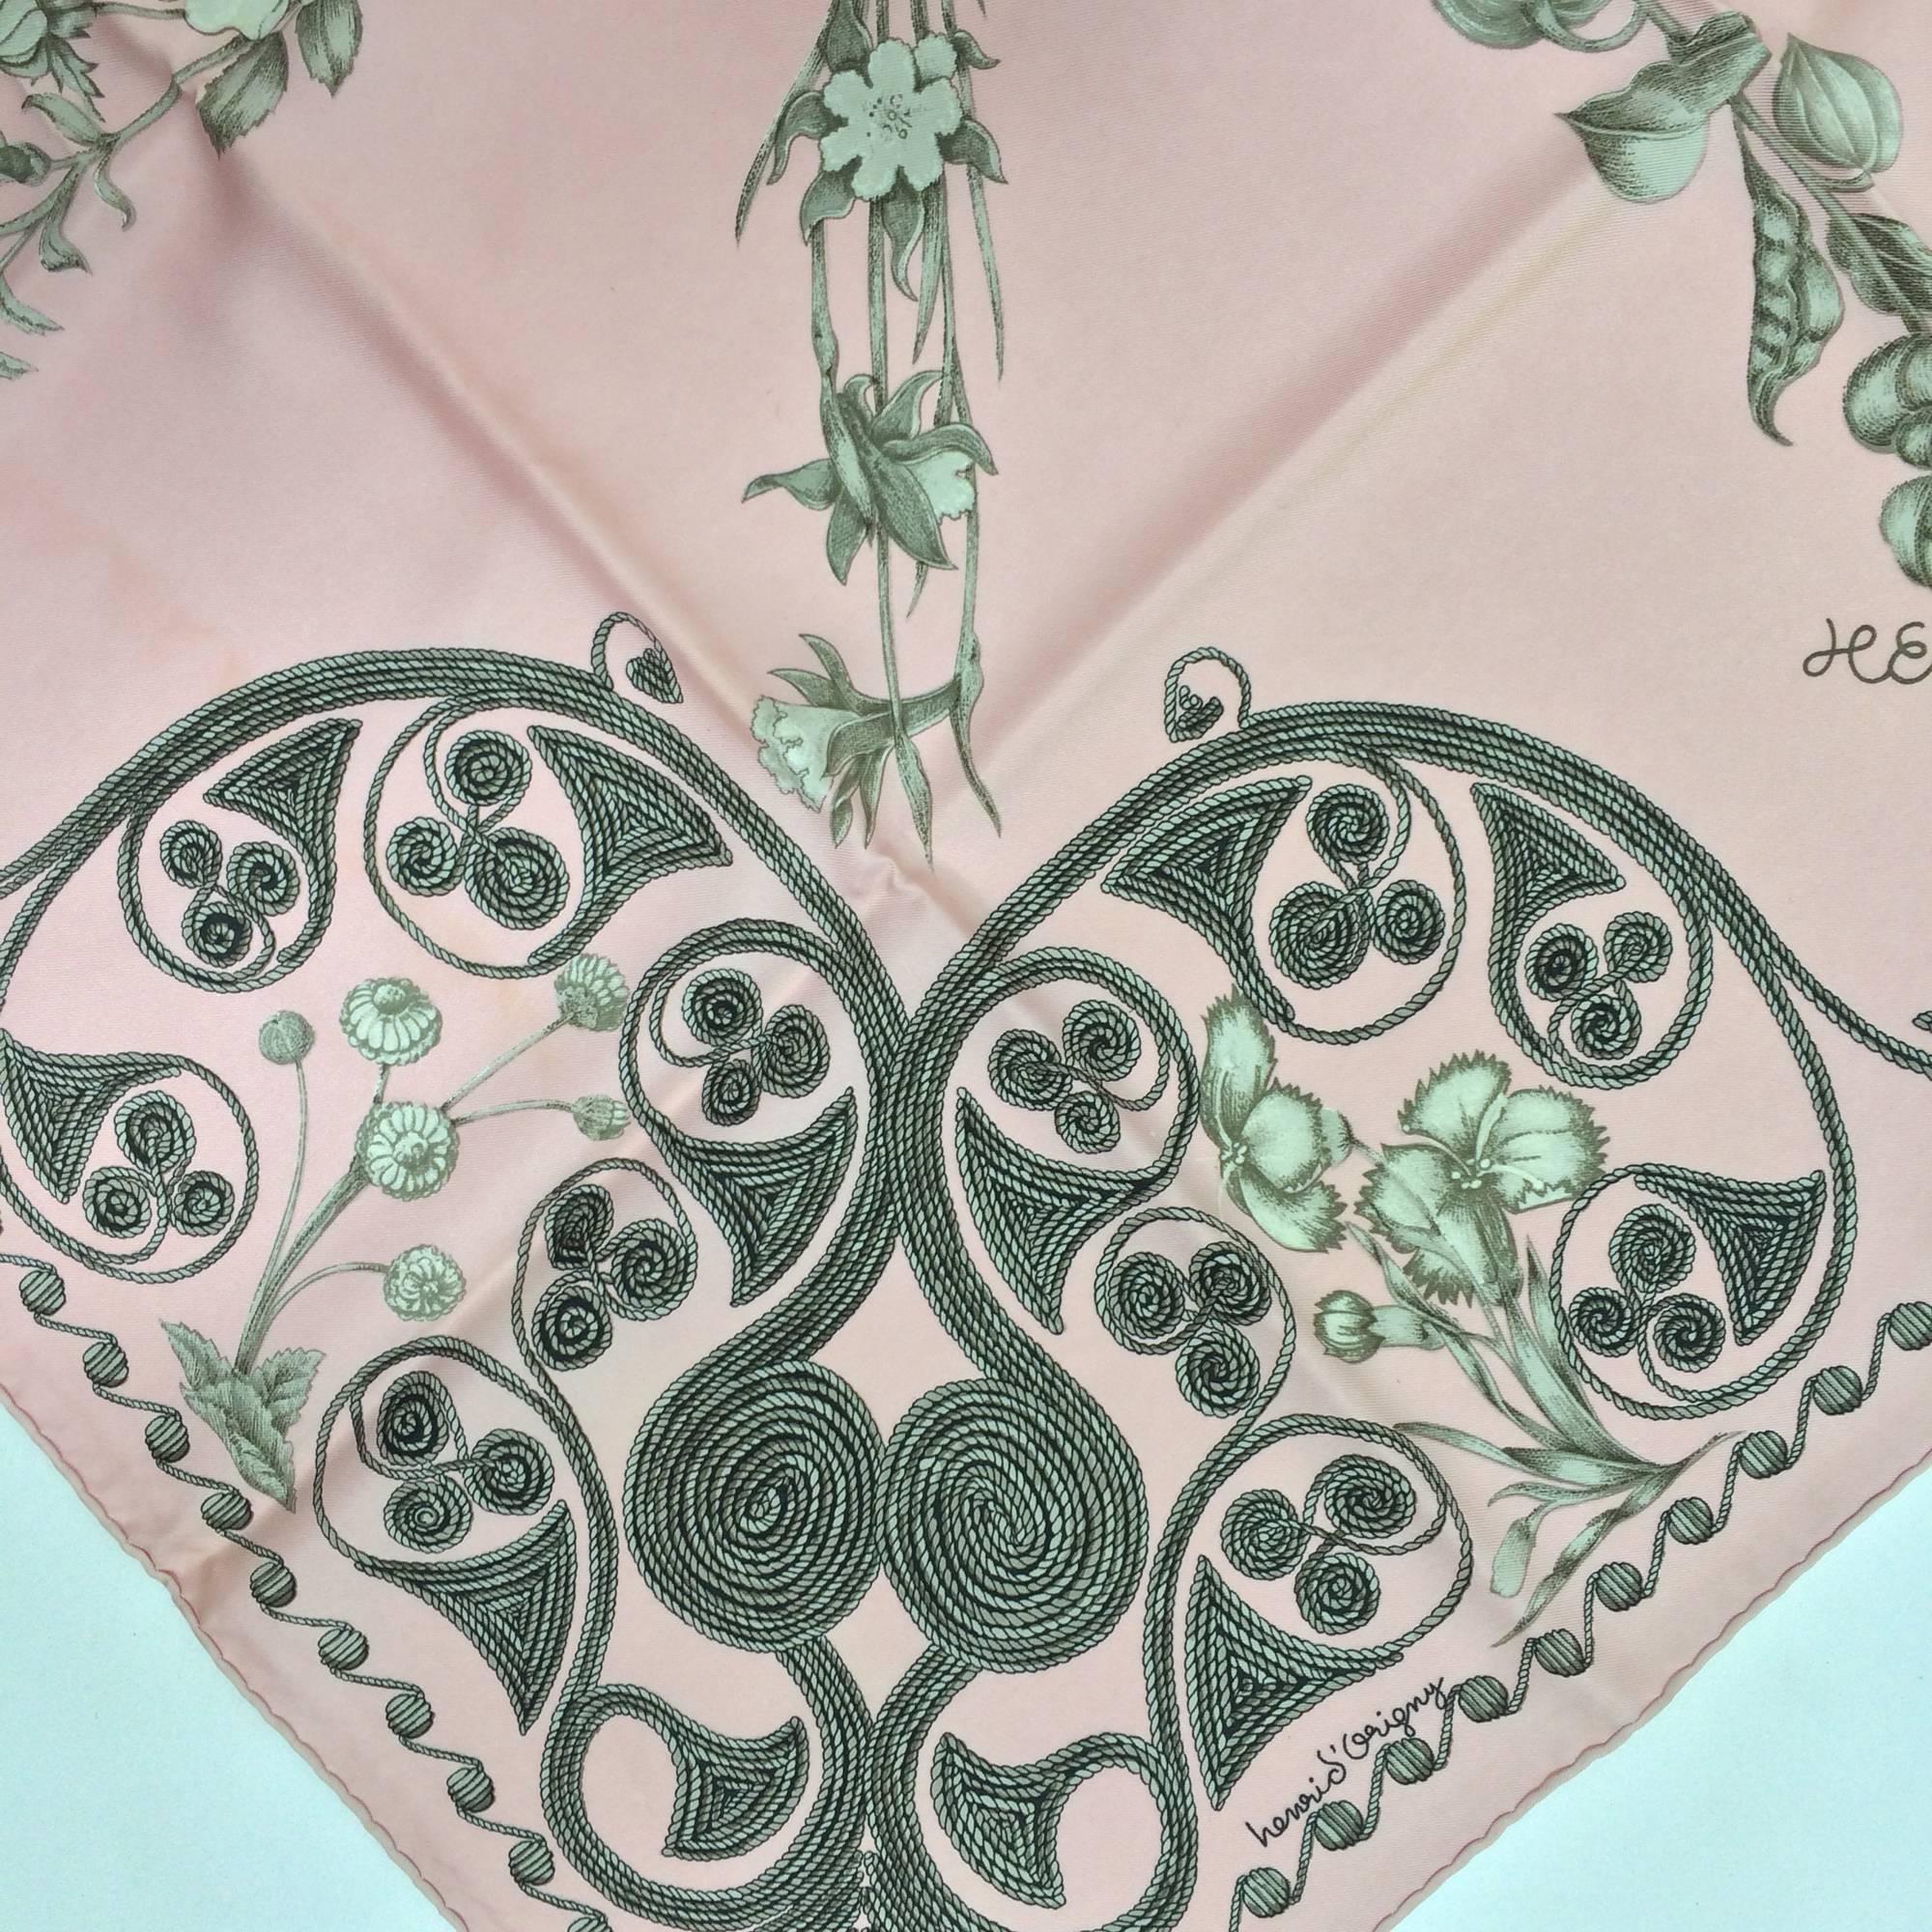  Hermes Paris silk twill scarf, Arabesques Henri d'Origny in pale pink and shades of grey...35